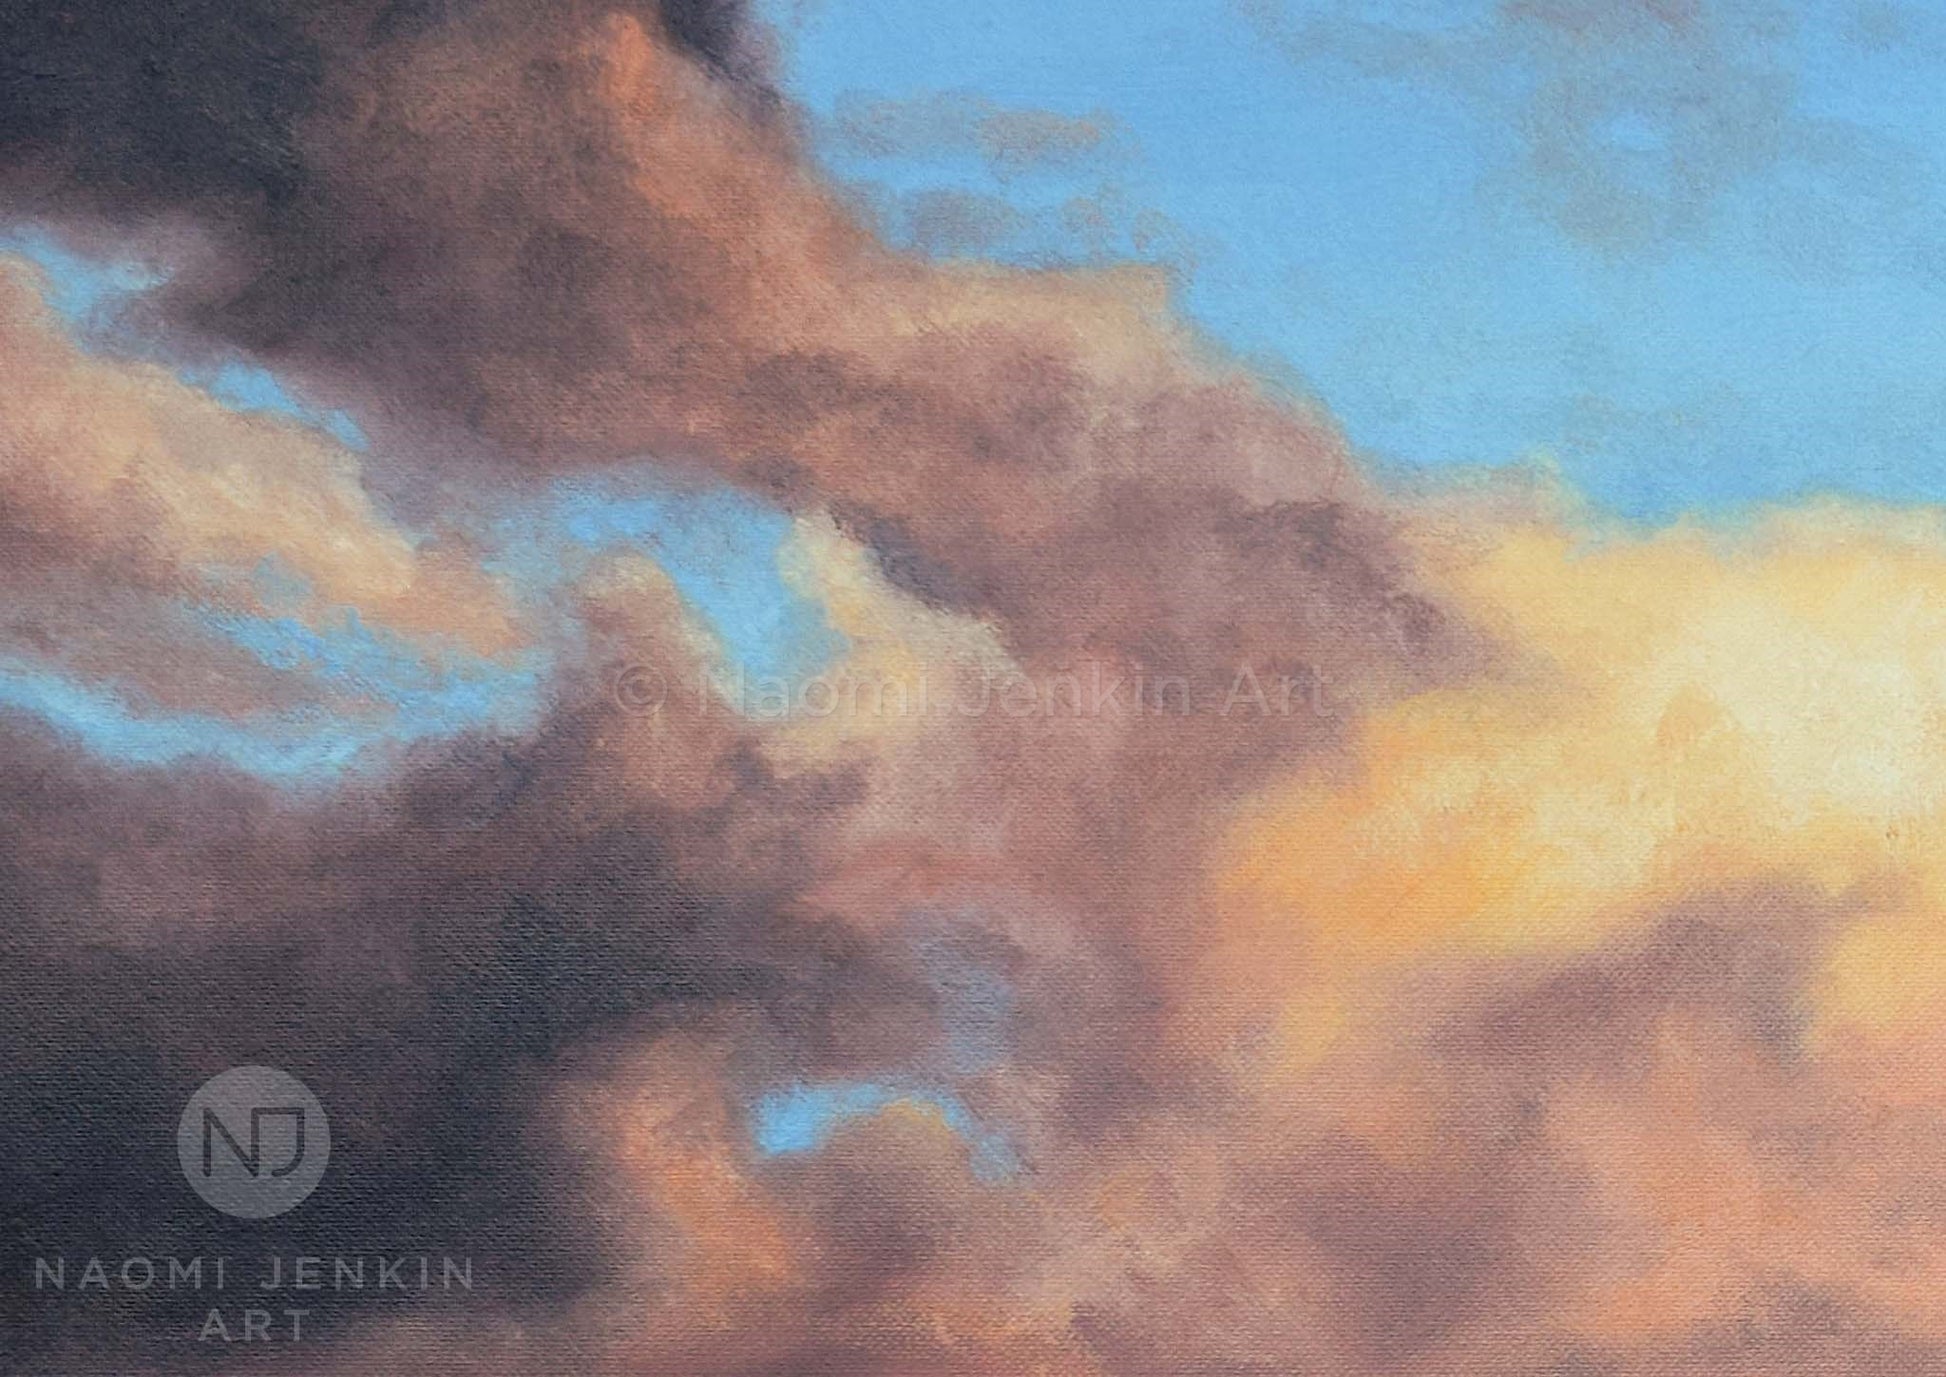 Sky close up from the 'A New Day Dawns' seascape painting by Naomi Jenkin